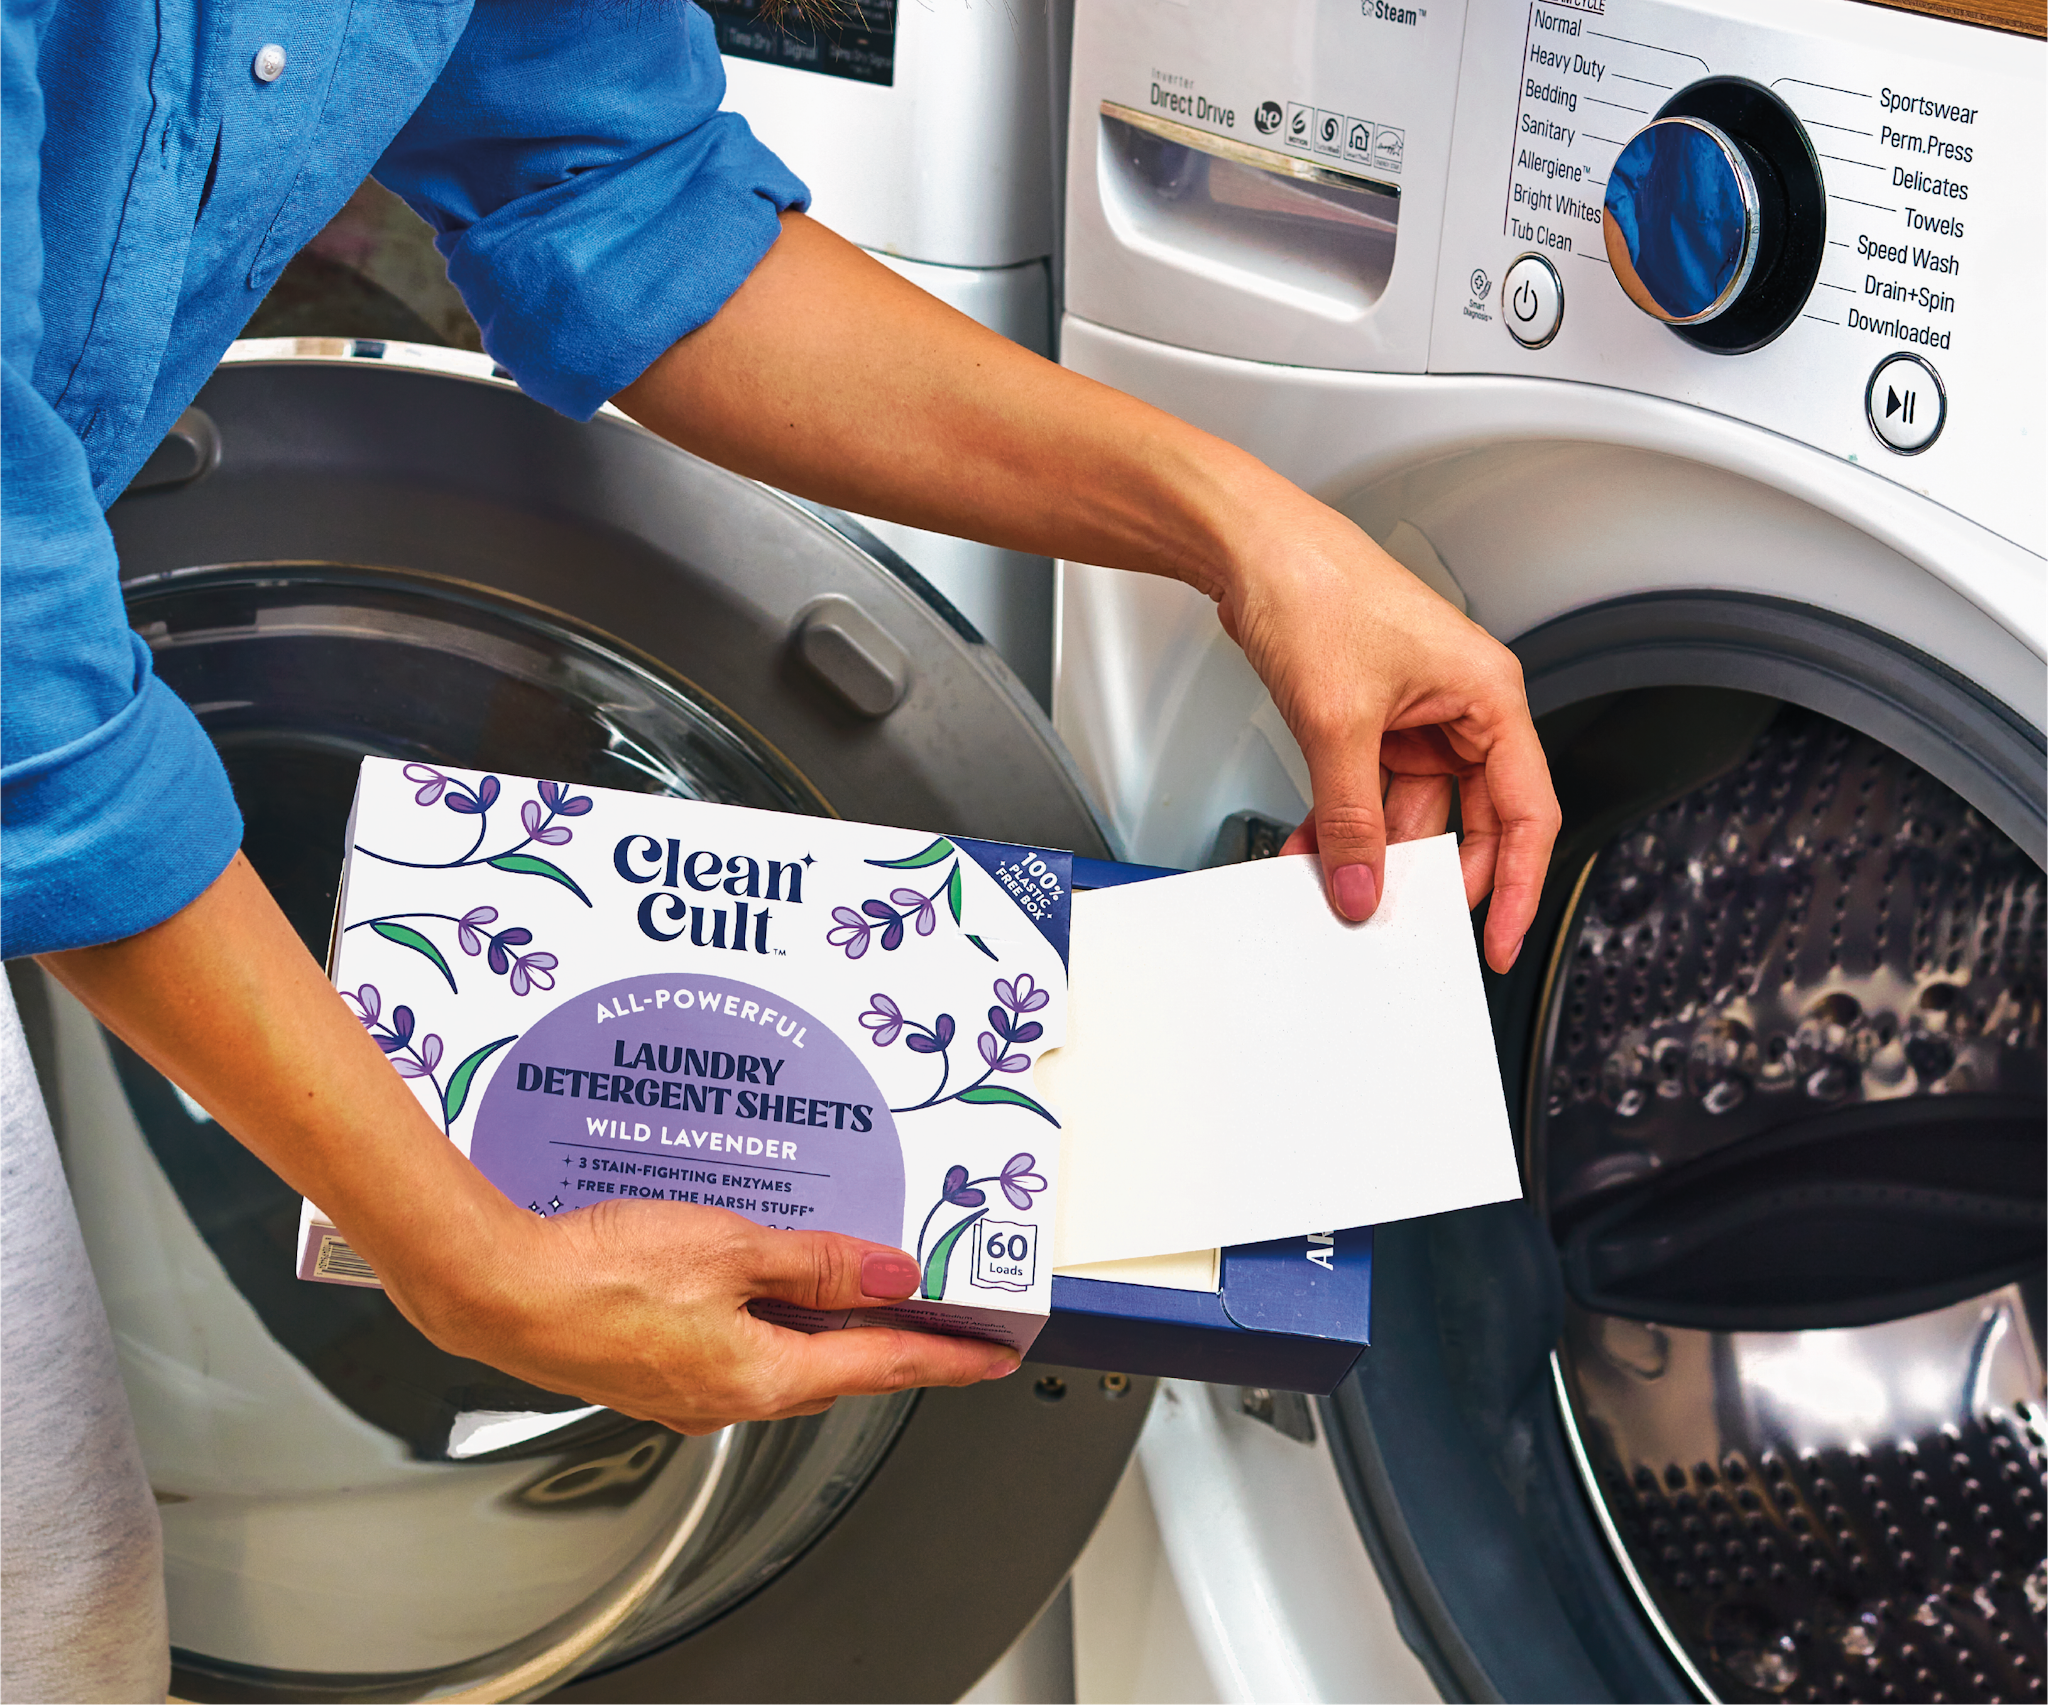 Laundry Detergent Sheets